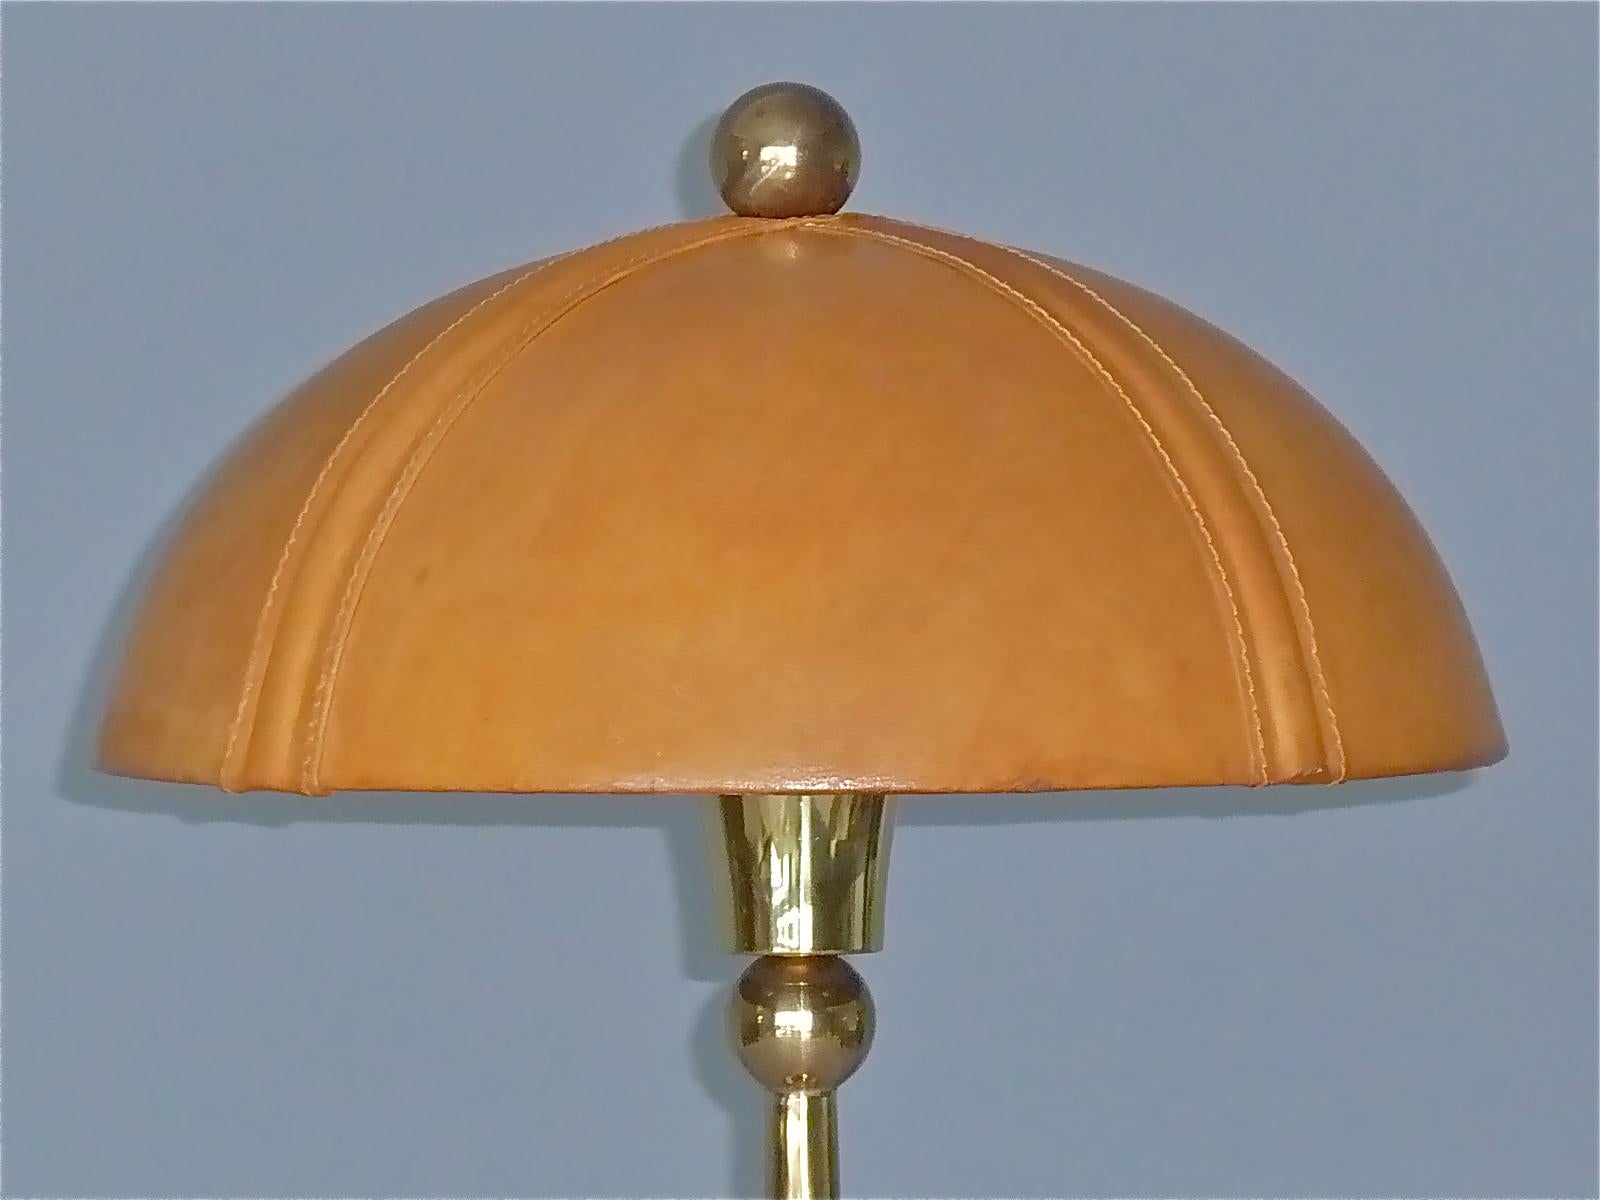 Brass Sculptural Gilt Bronze Leather Knotted Table Lamp French 1970s Jansen Pergay Era For Sale